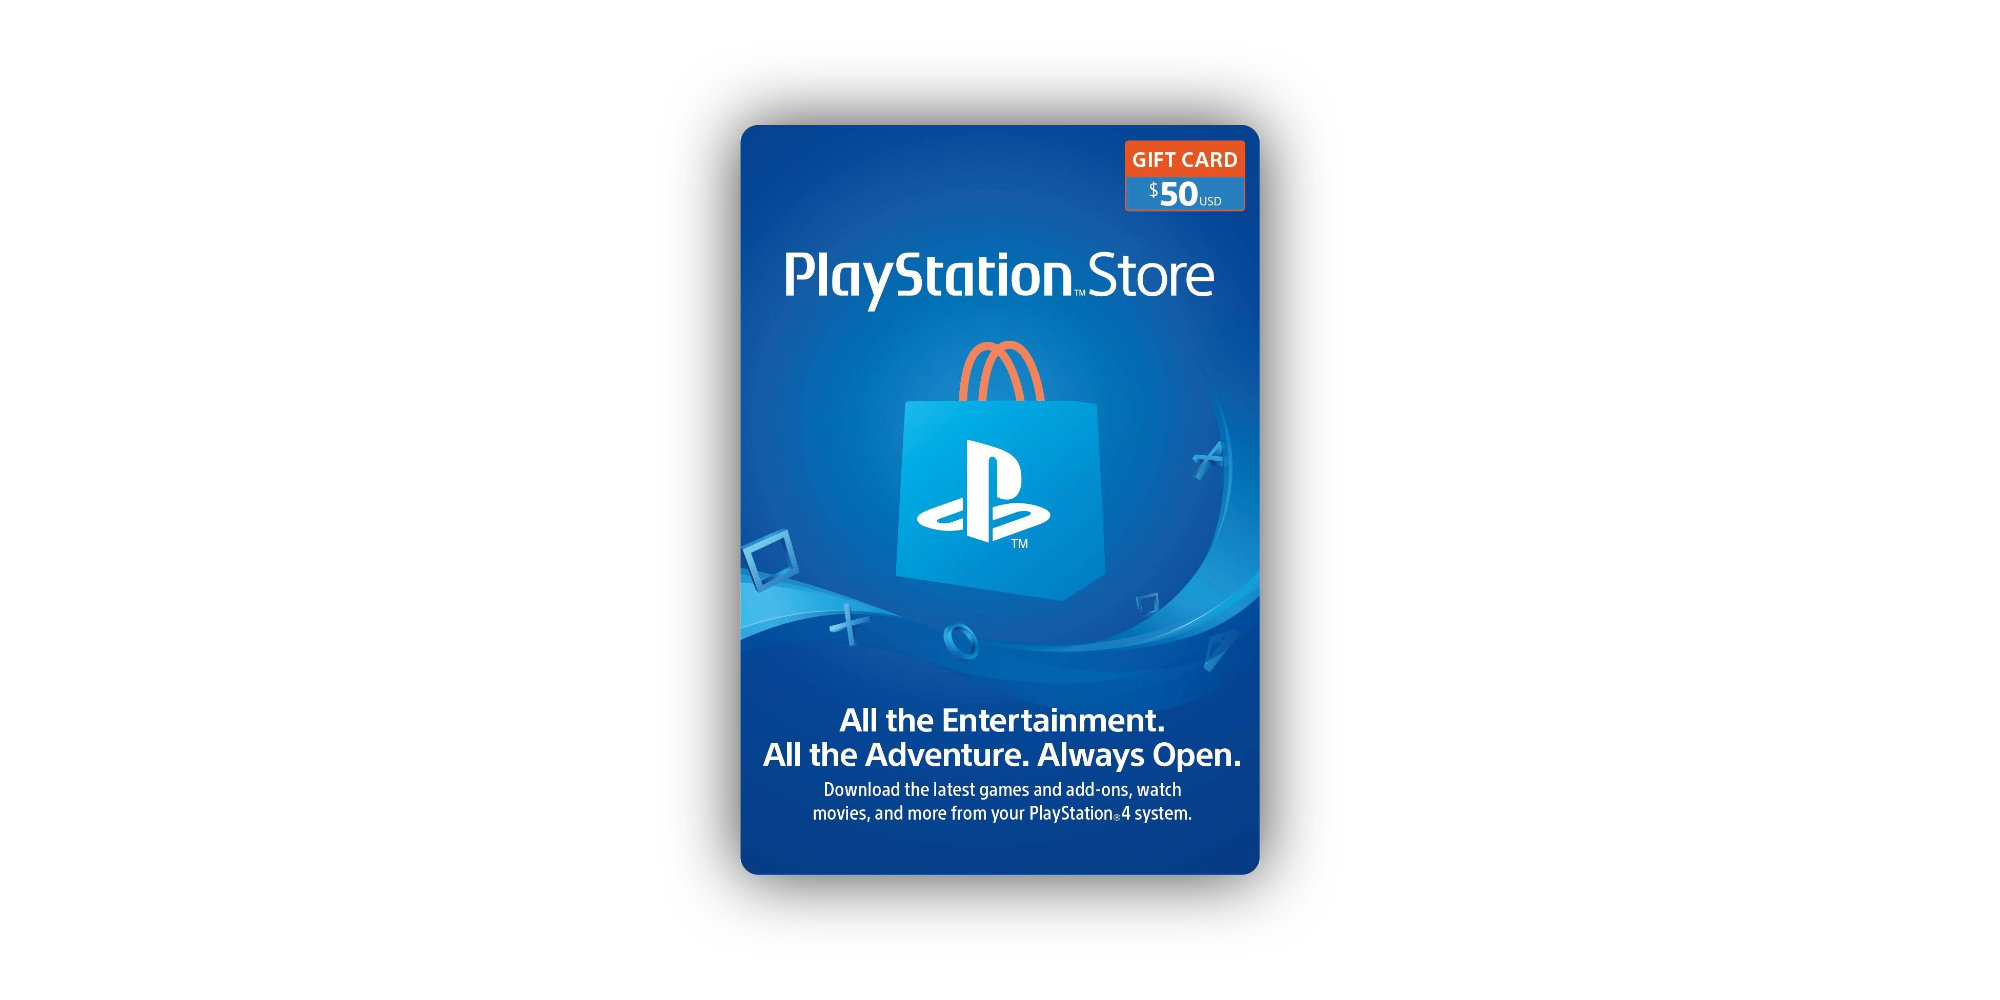 Ps store turkey цены на подписку. PS Store Gift Cards TL. PLAYSTATION Gift Card. PLAYSTATION Store Gift Card. Карточки PS Store.